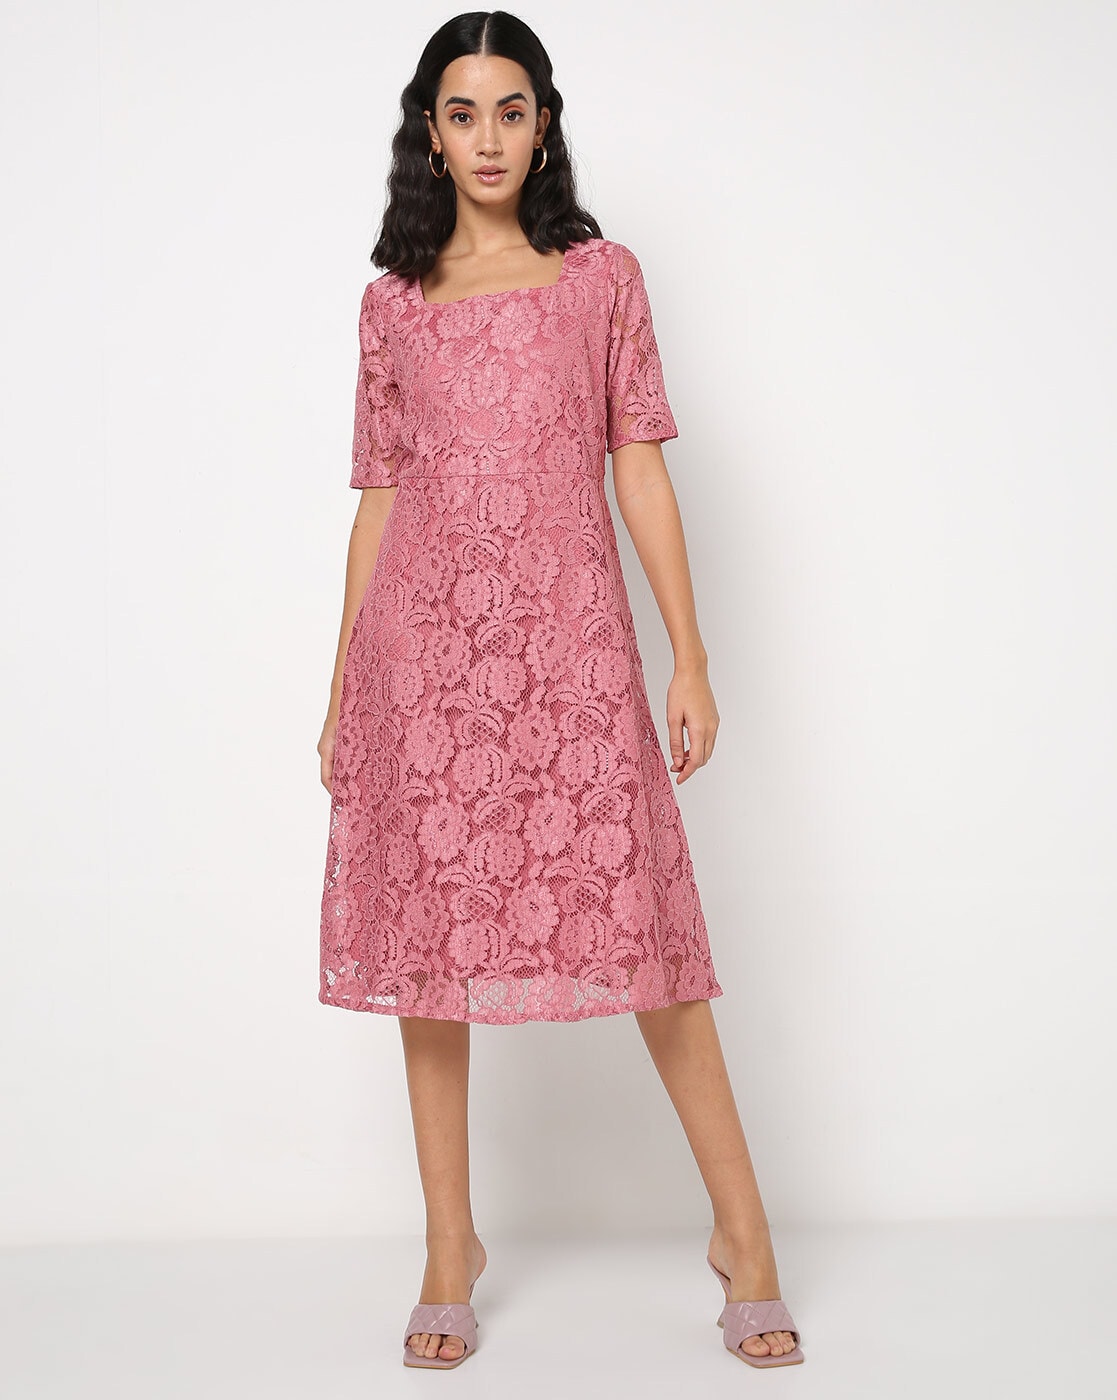 Pink Lace High Low Homecoming Dress with Puffy Sleeves - $78.9768 #MXL86028  - SheProm.com